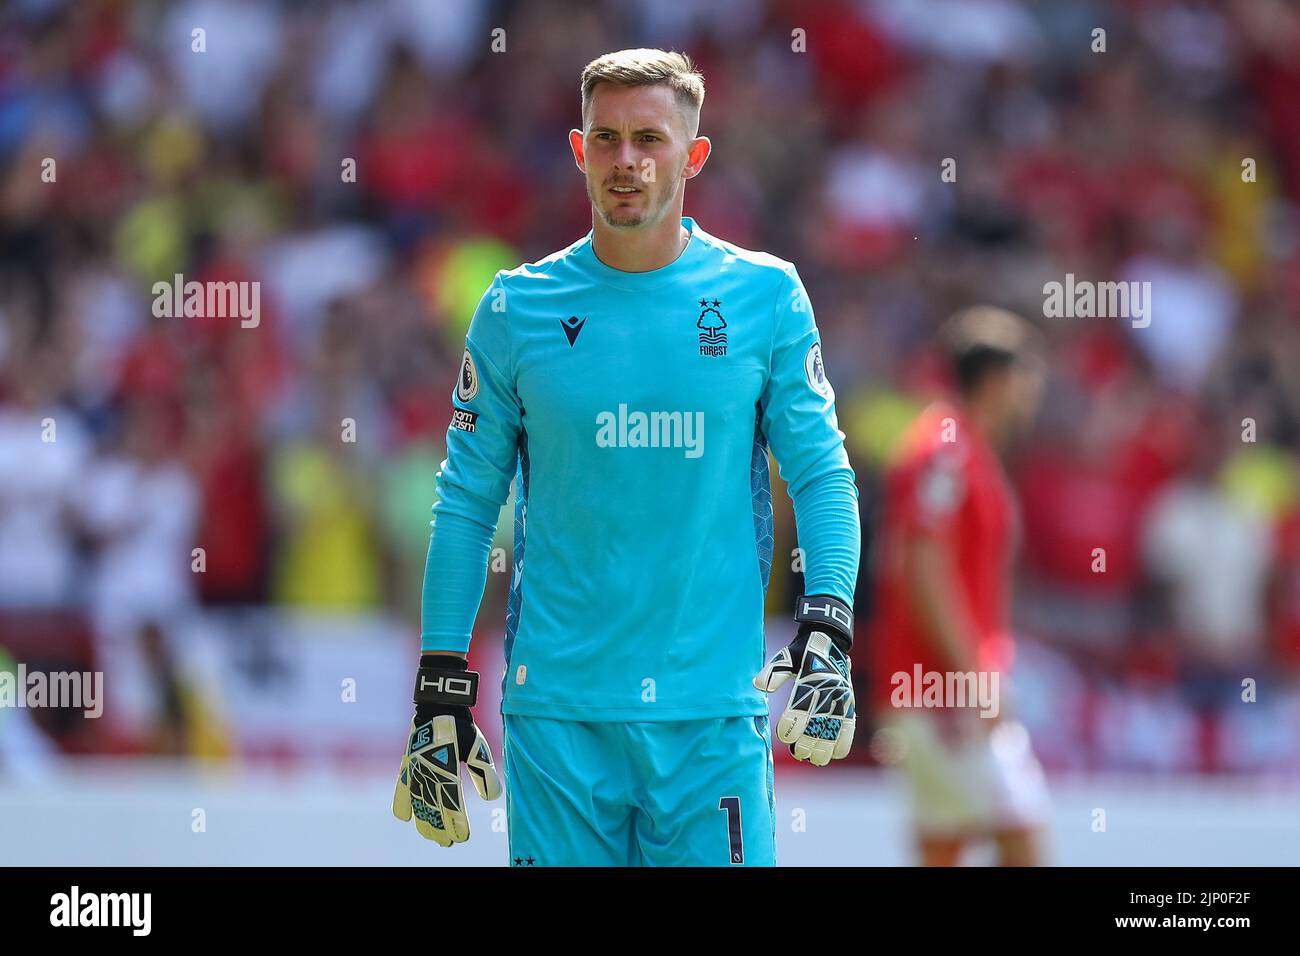 Dean Henderson #1 of Nottingham Forest during the game Stock Photo